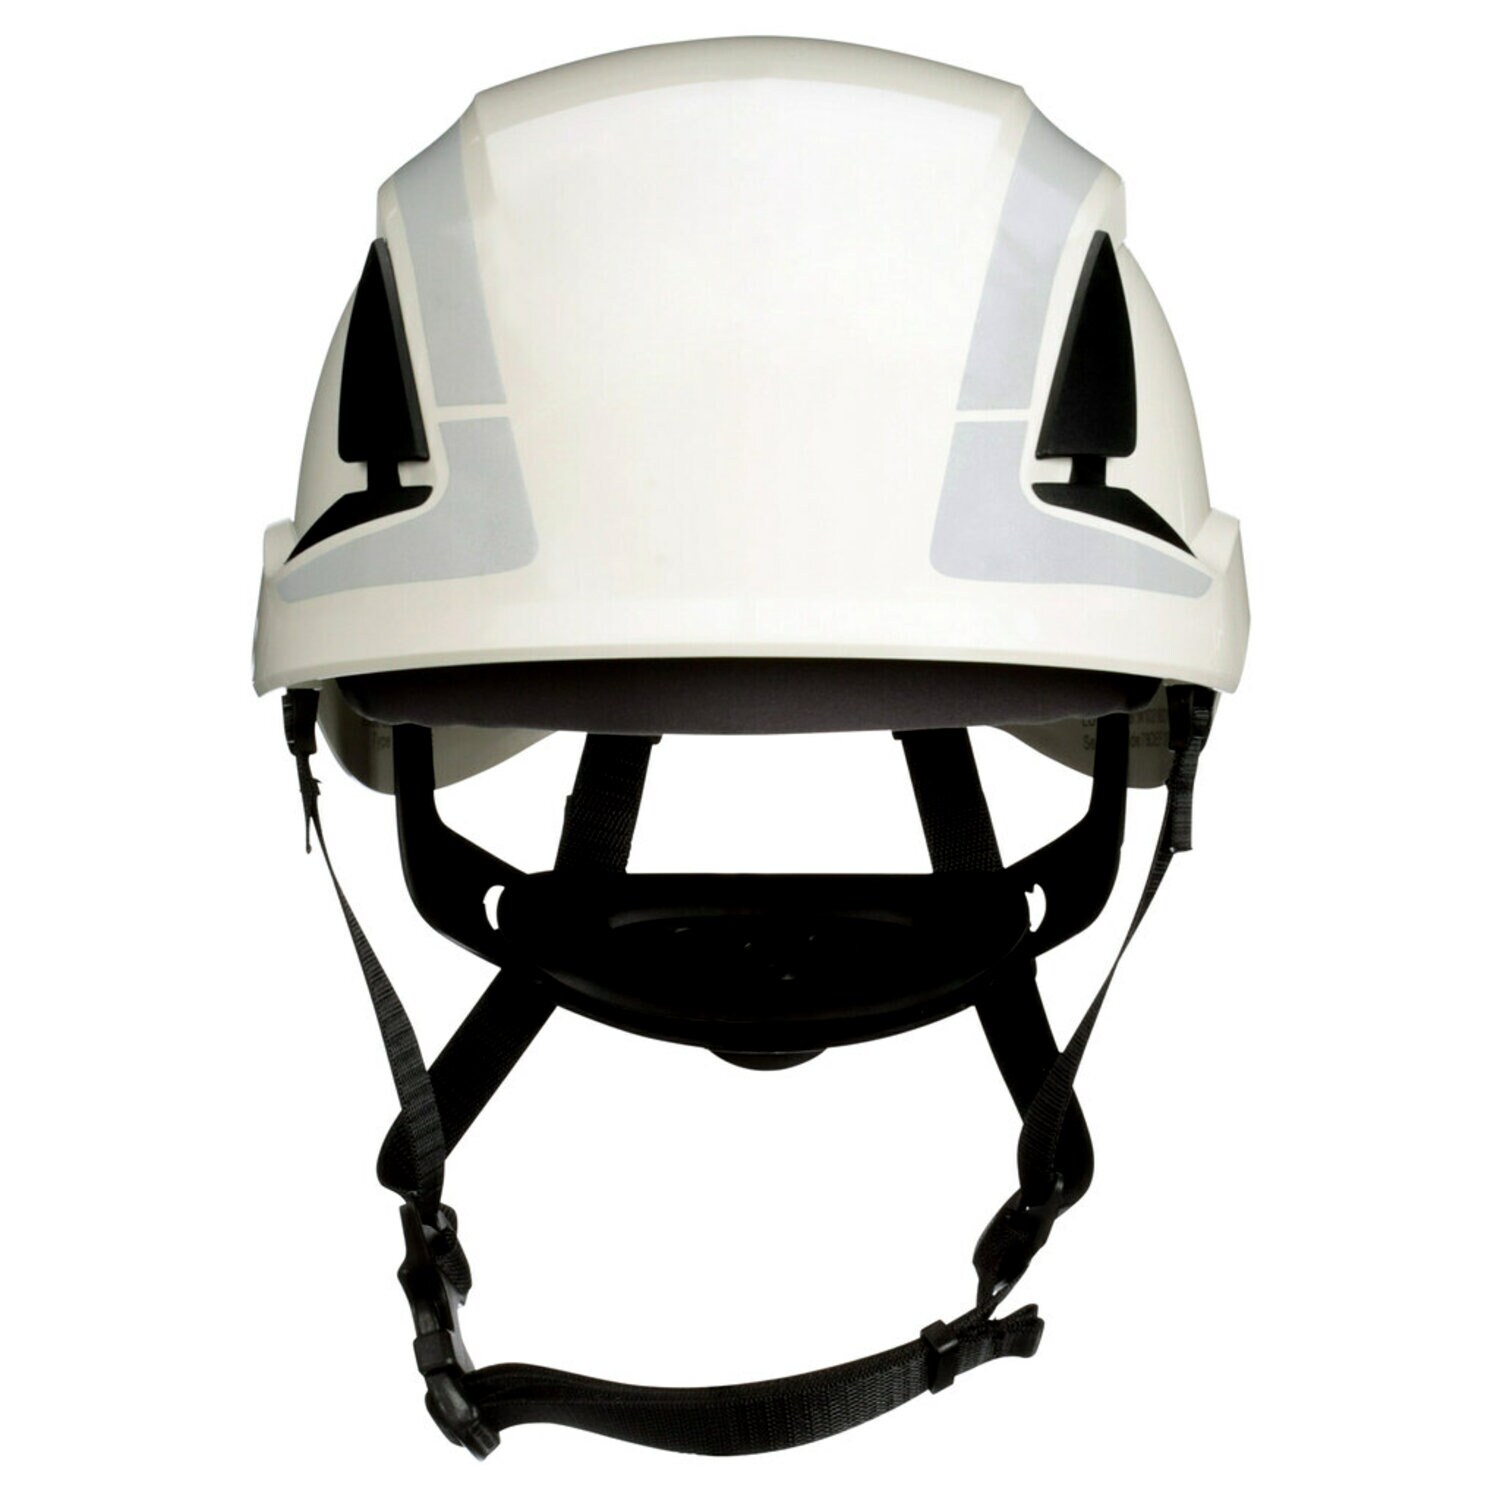 7100207831 - 3M X5-S4PTCS1 Standard 4 Point Chin Strap with buckle for SecureFit
Safety Helmet